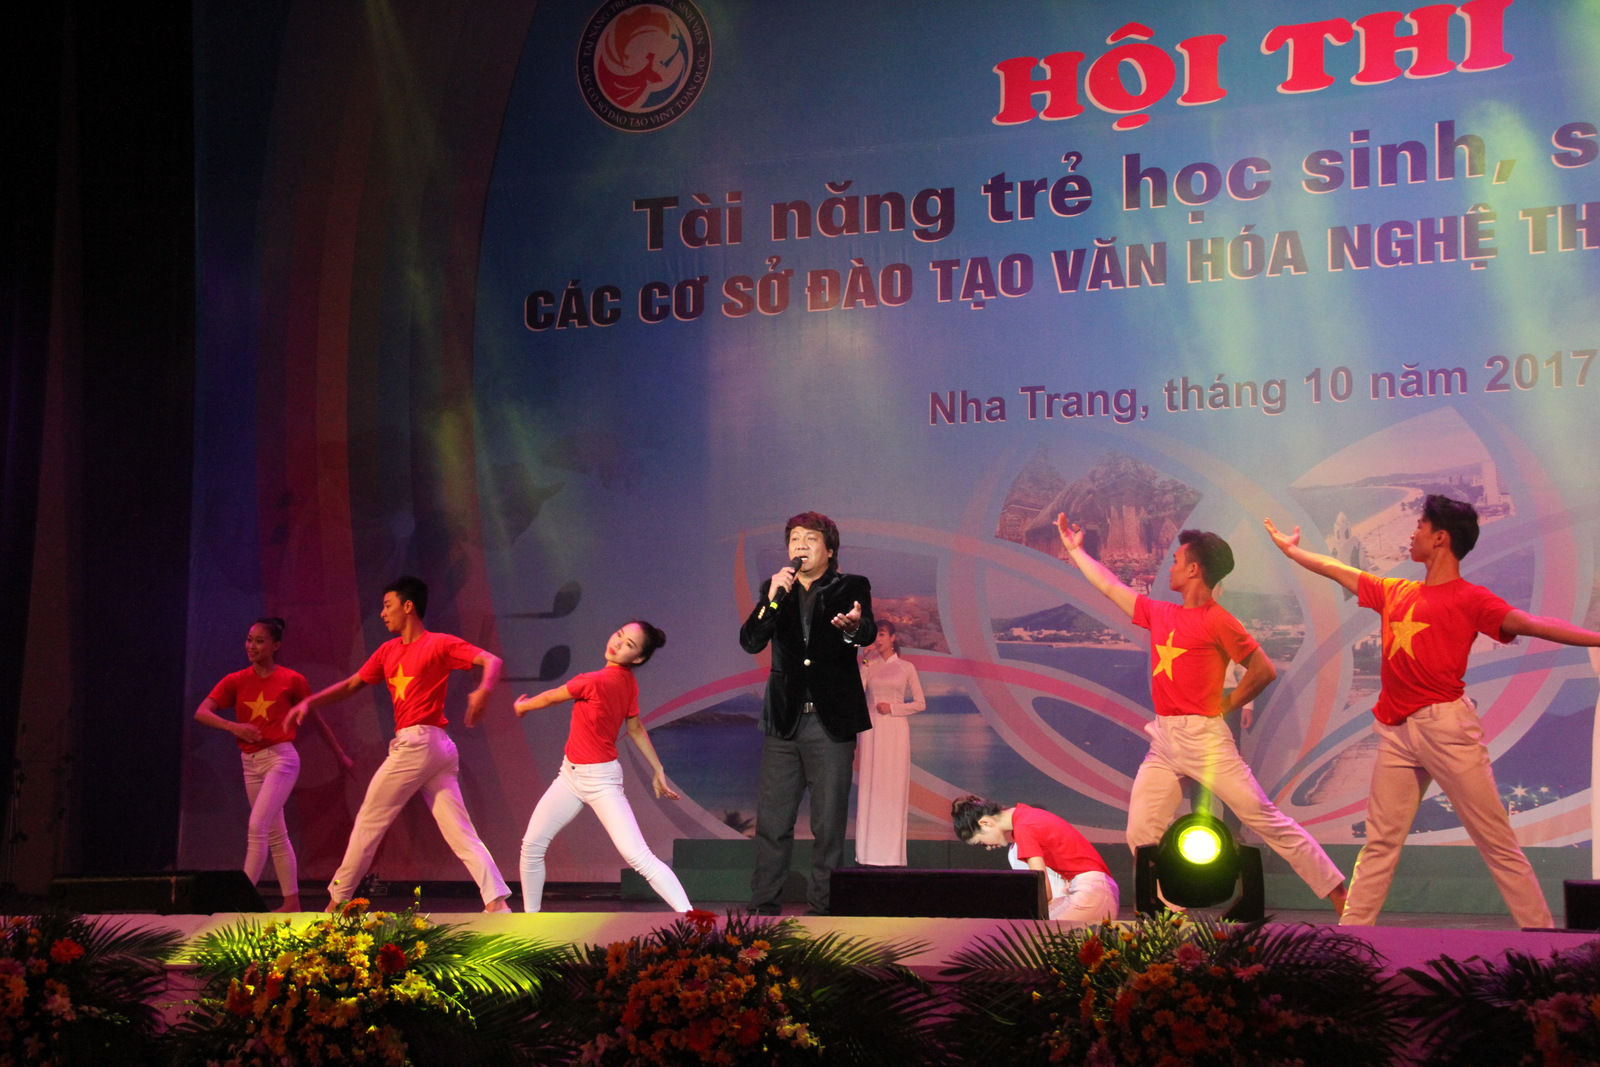 Meritorious Artist Quoc Hung performing at opening ceremony.